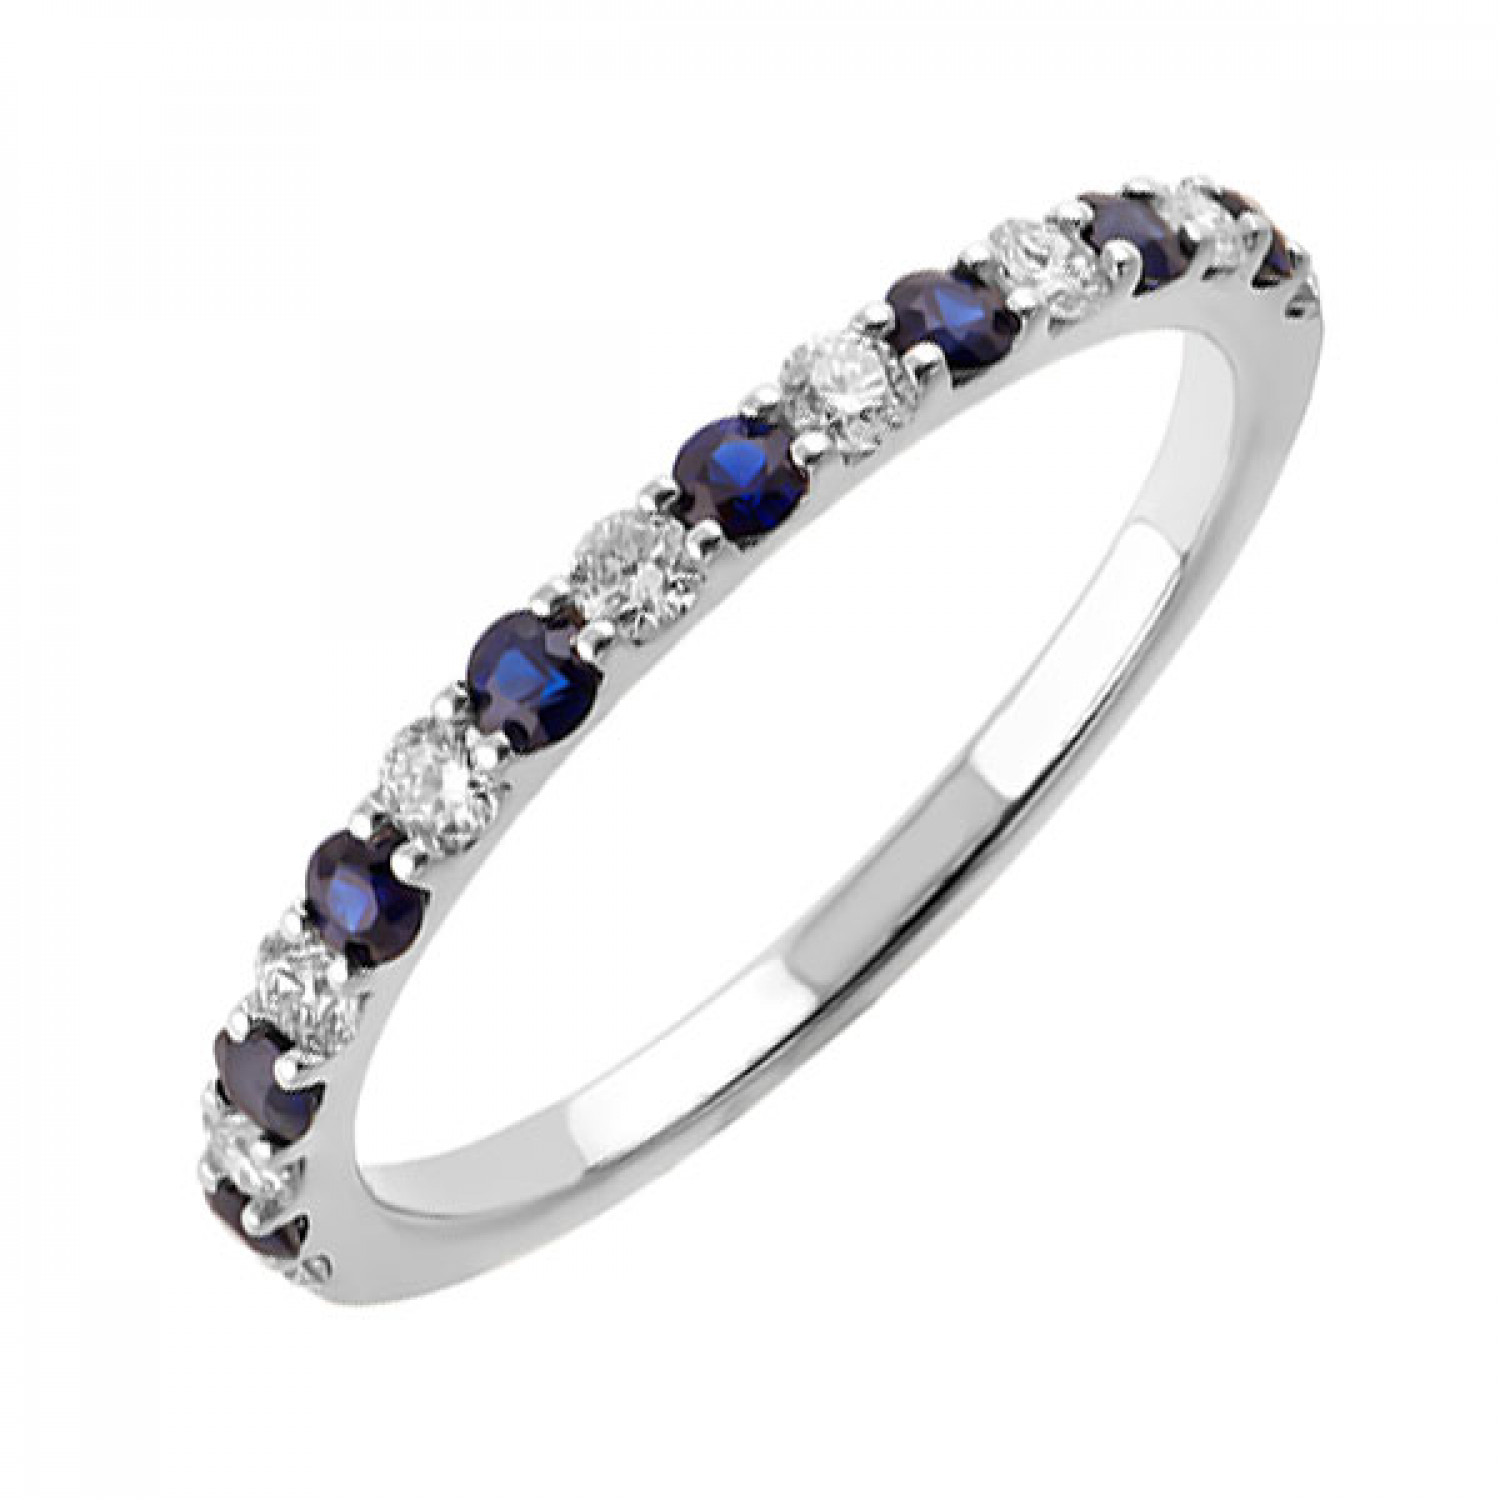 10KWG 1/5CT Diamond & 1/5CT Sapphire Stackable Ring #12517